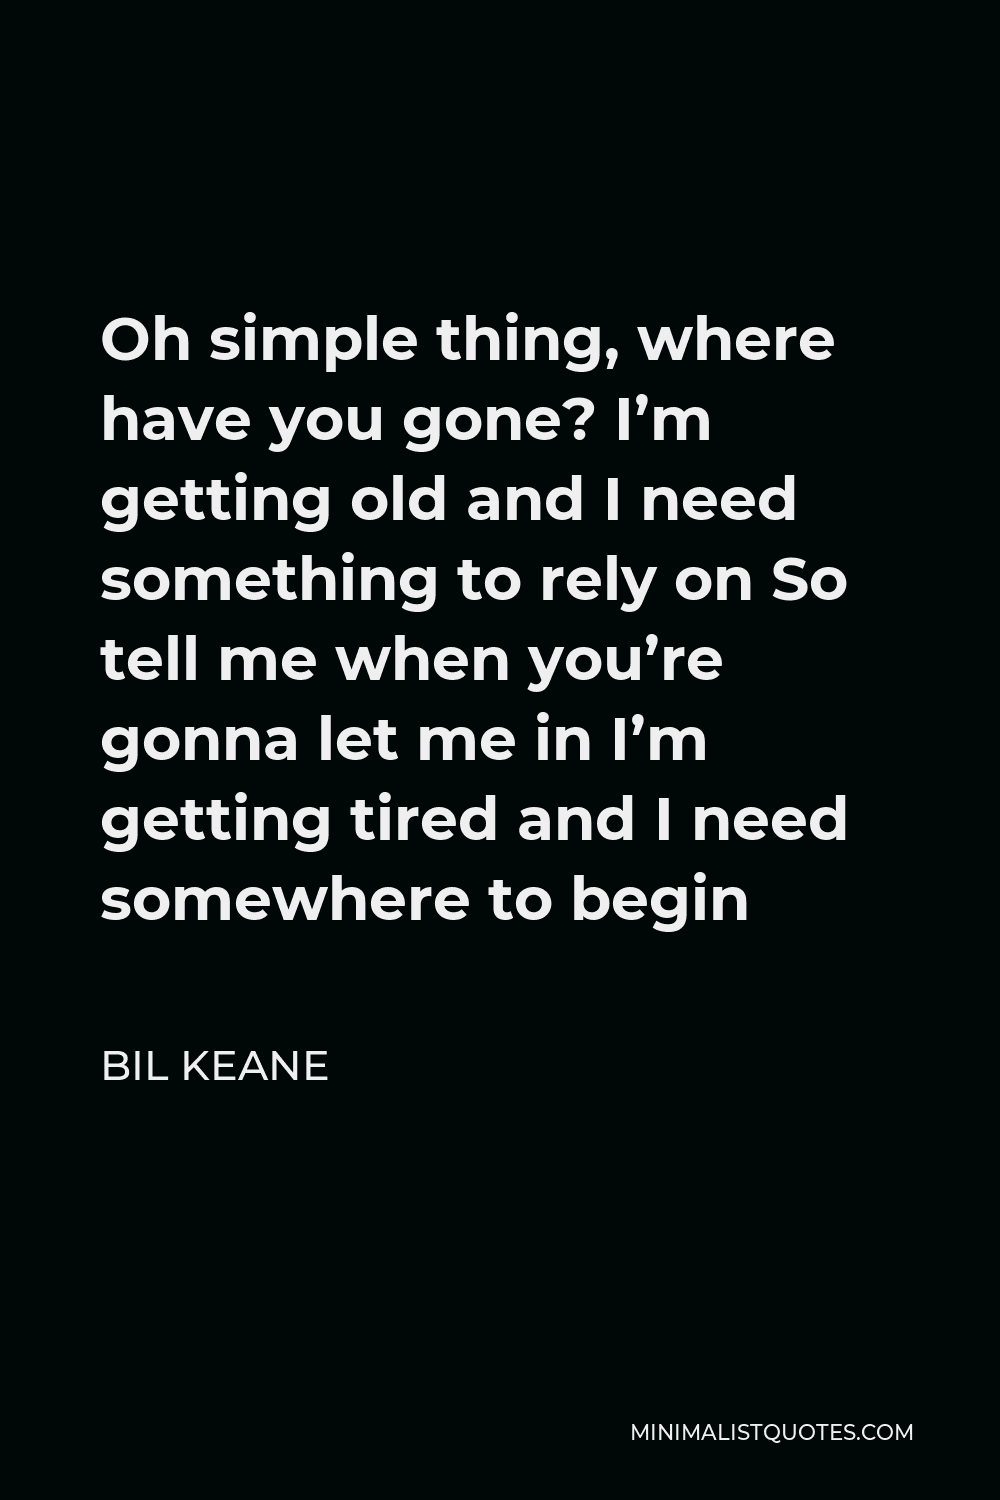 Bil Keane Quote - Oh simple thing, where have you gone? I’m getting old and I need something to rely on So tell me when you’re gonna let me in I’m getting tired and I need somewhere to begin